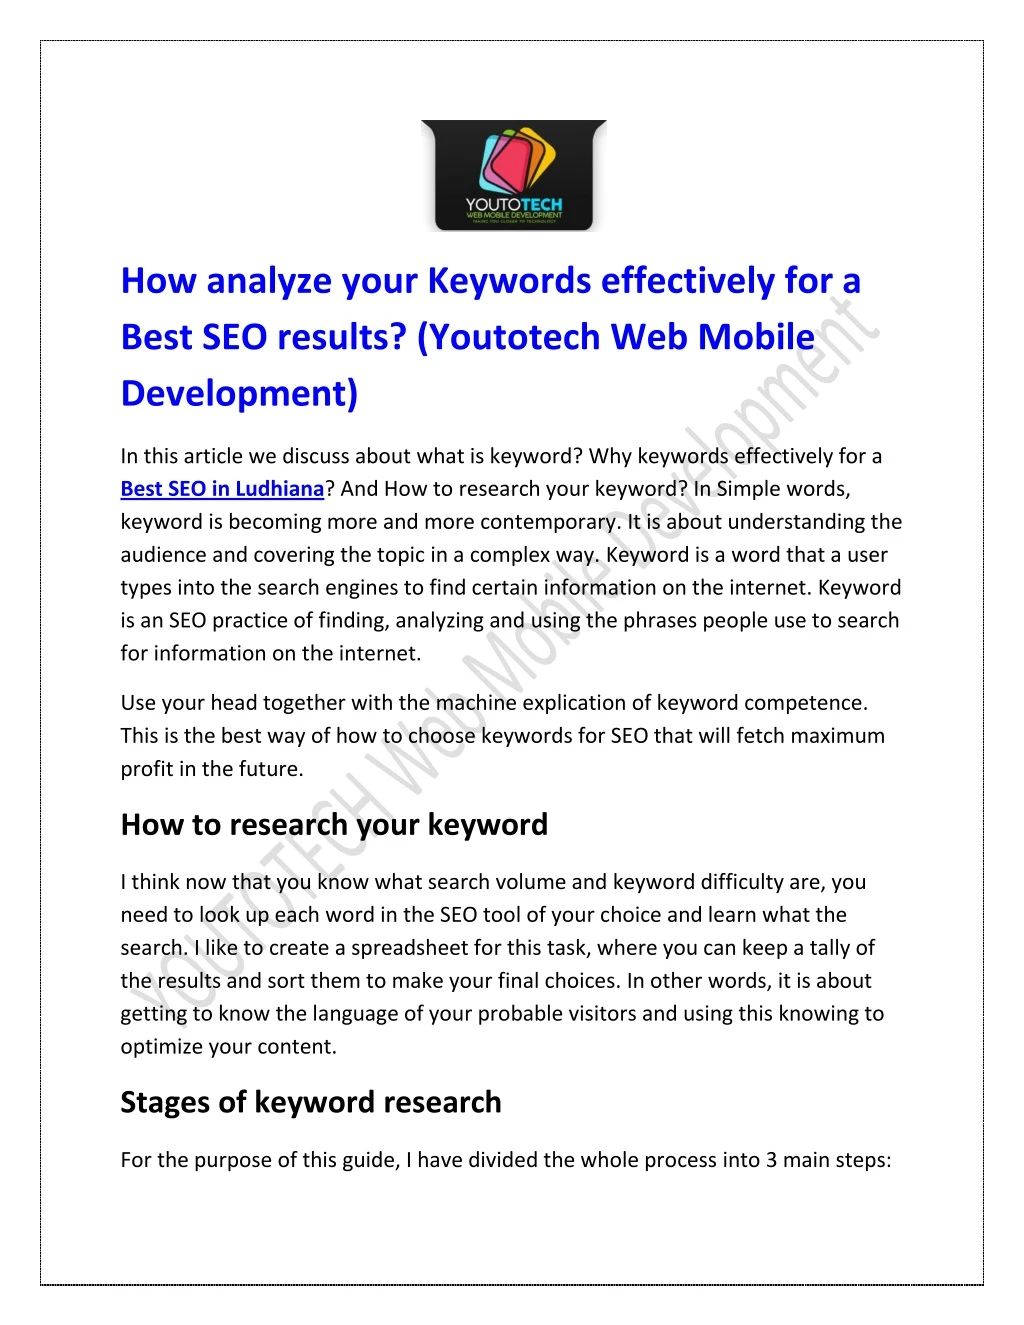 how analyze your keywords effectively for a best